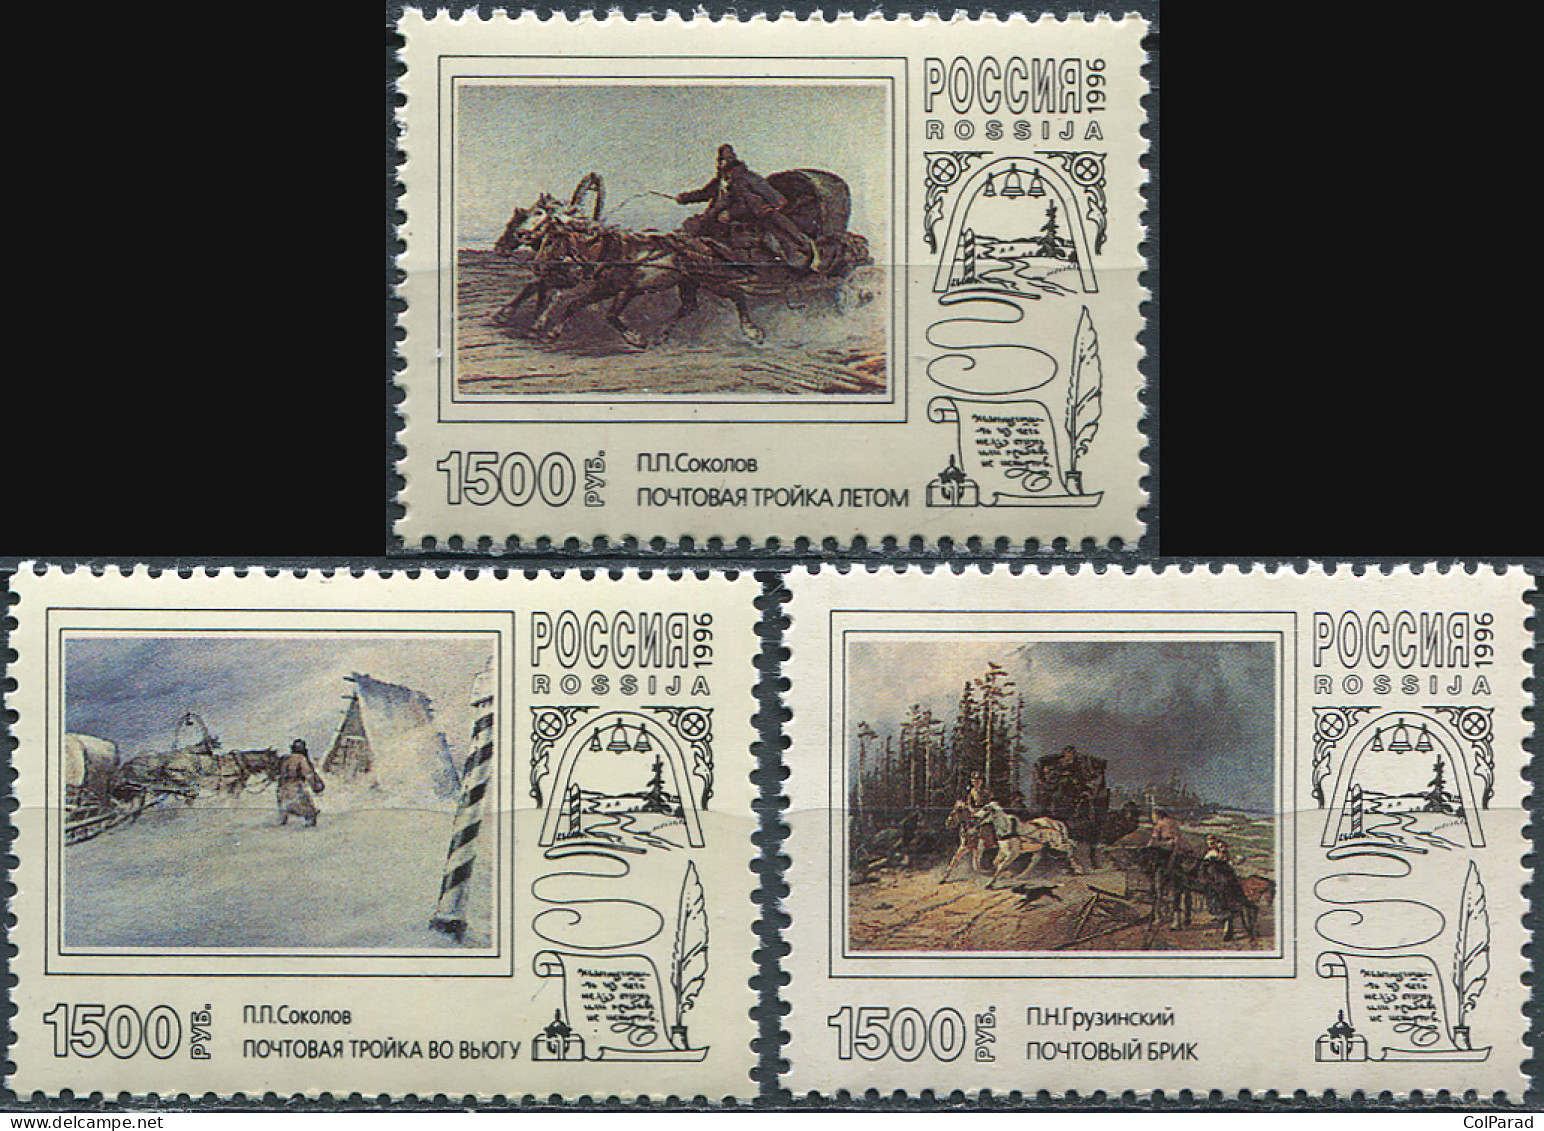 RUSSIA - 1996 - SET OF 3 STAMPS MNH ** - Postal Troikas In Paintings - Nuovi